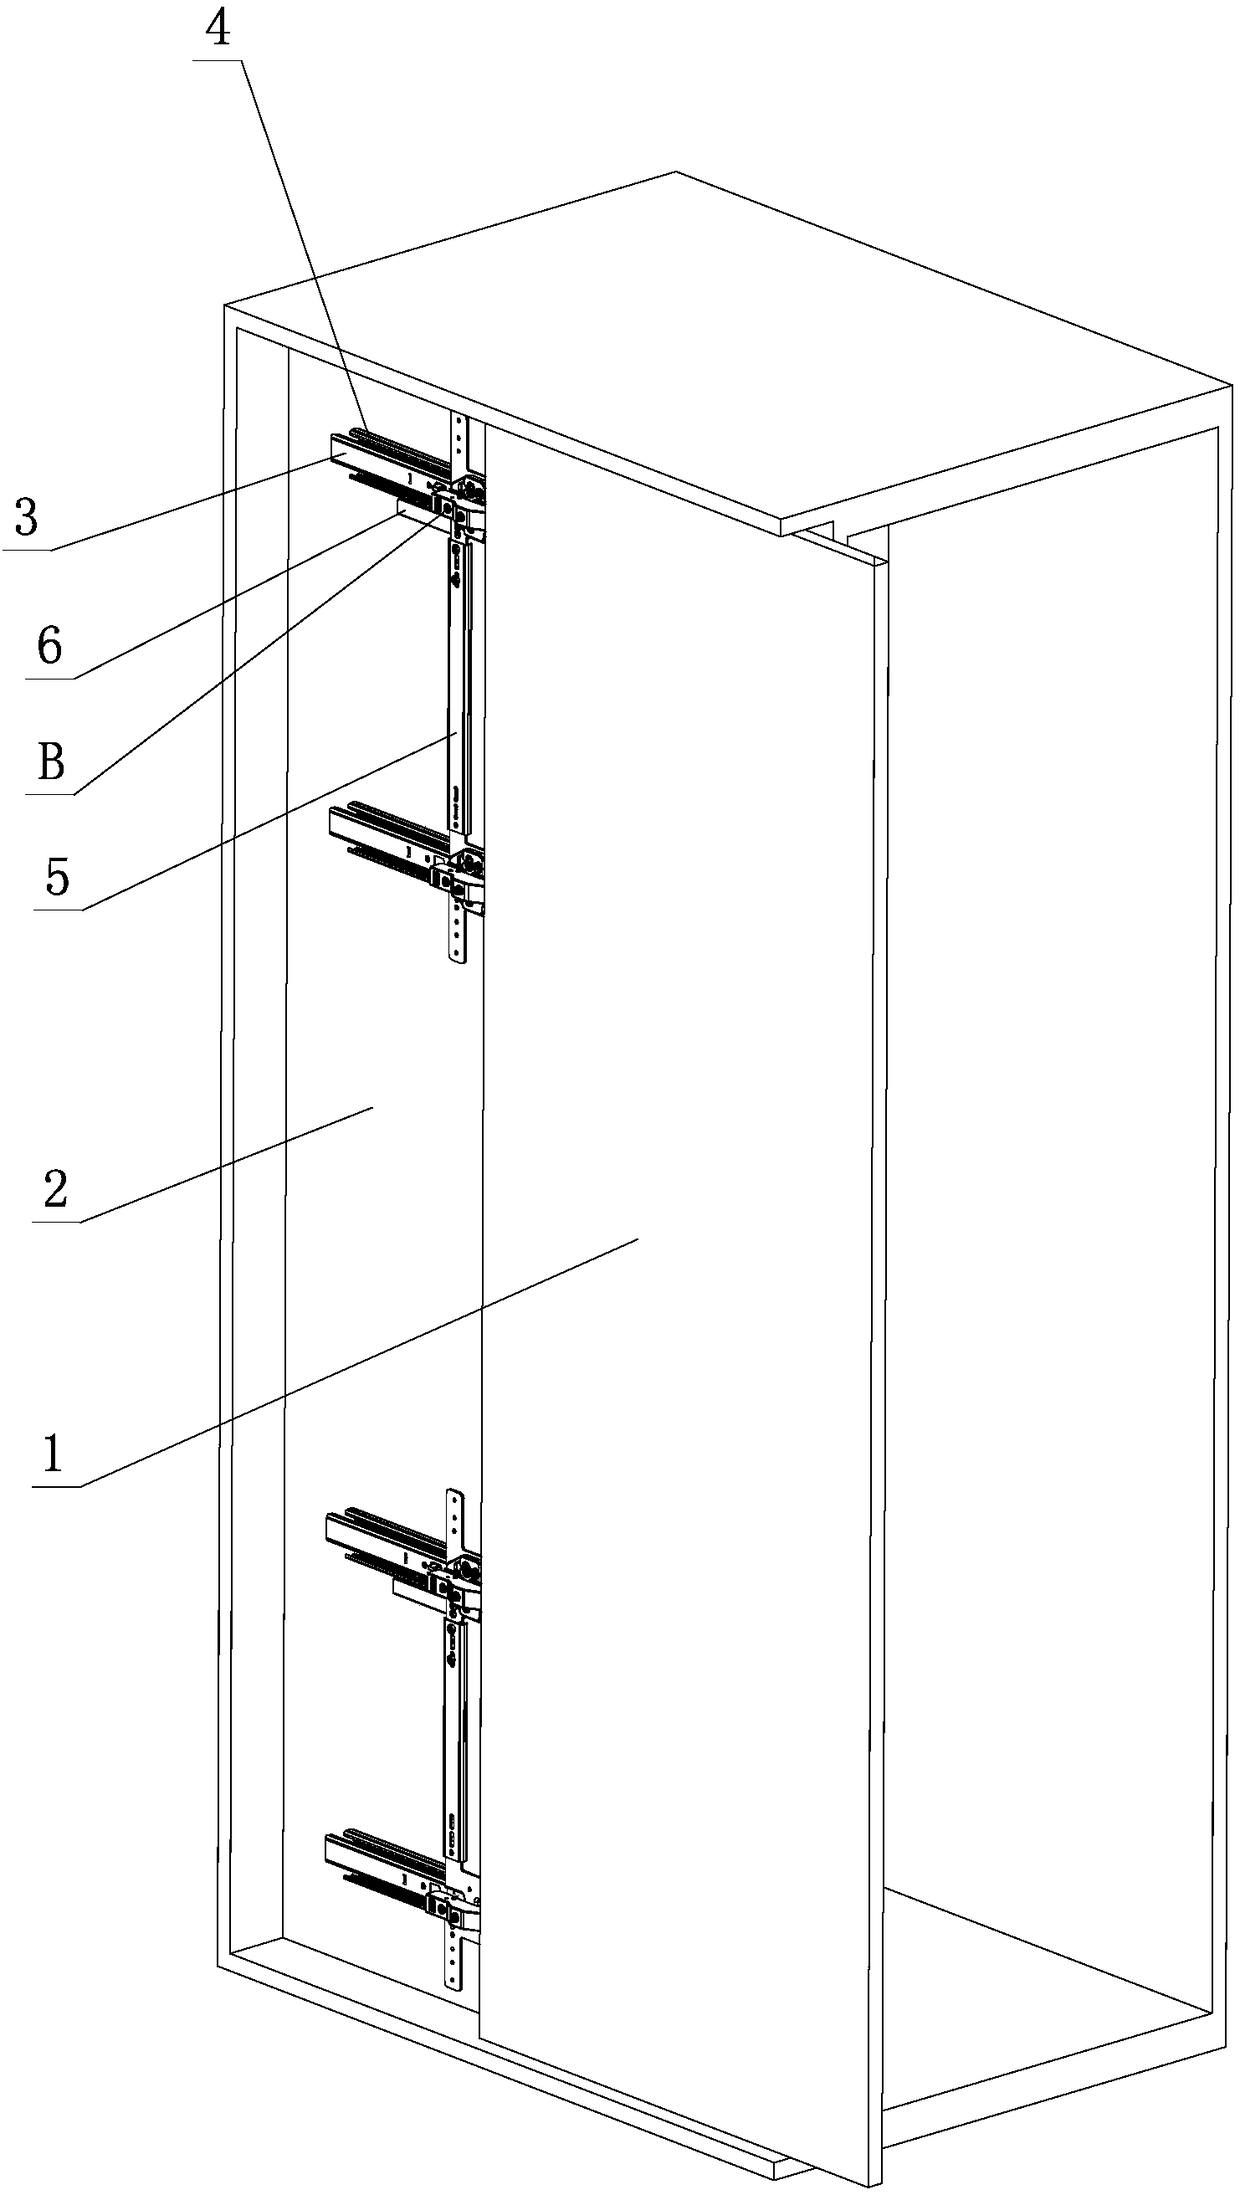 Limiting mechanism achieving rotary push-and-pull opening and closing on furniture